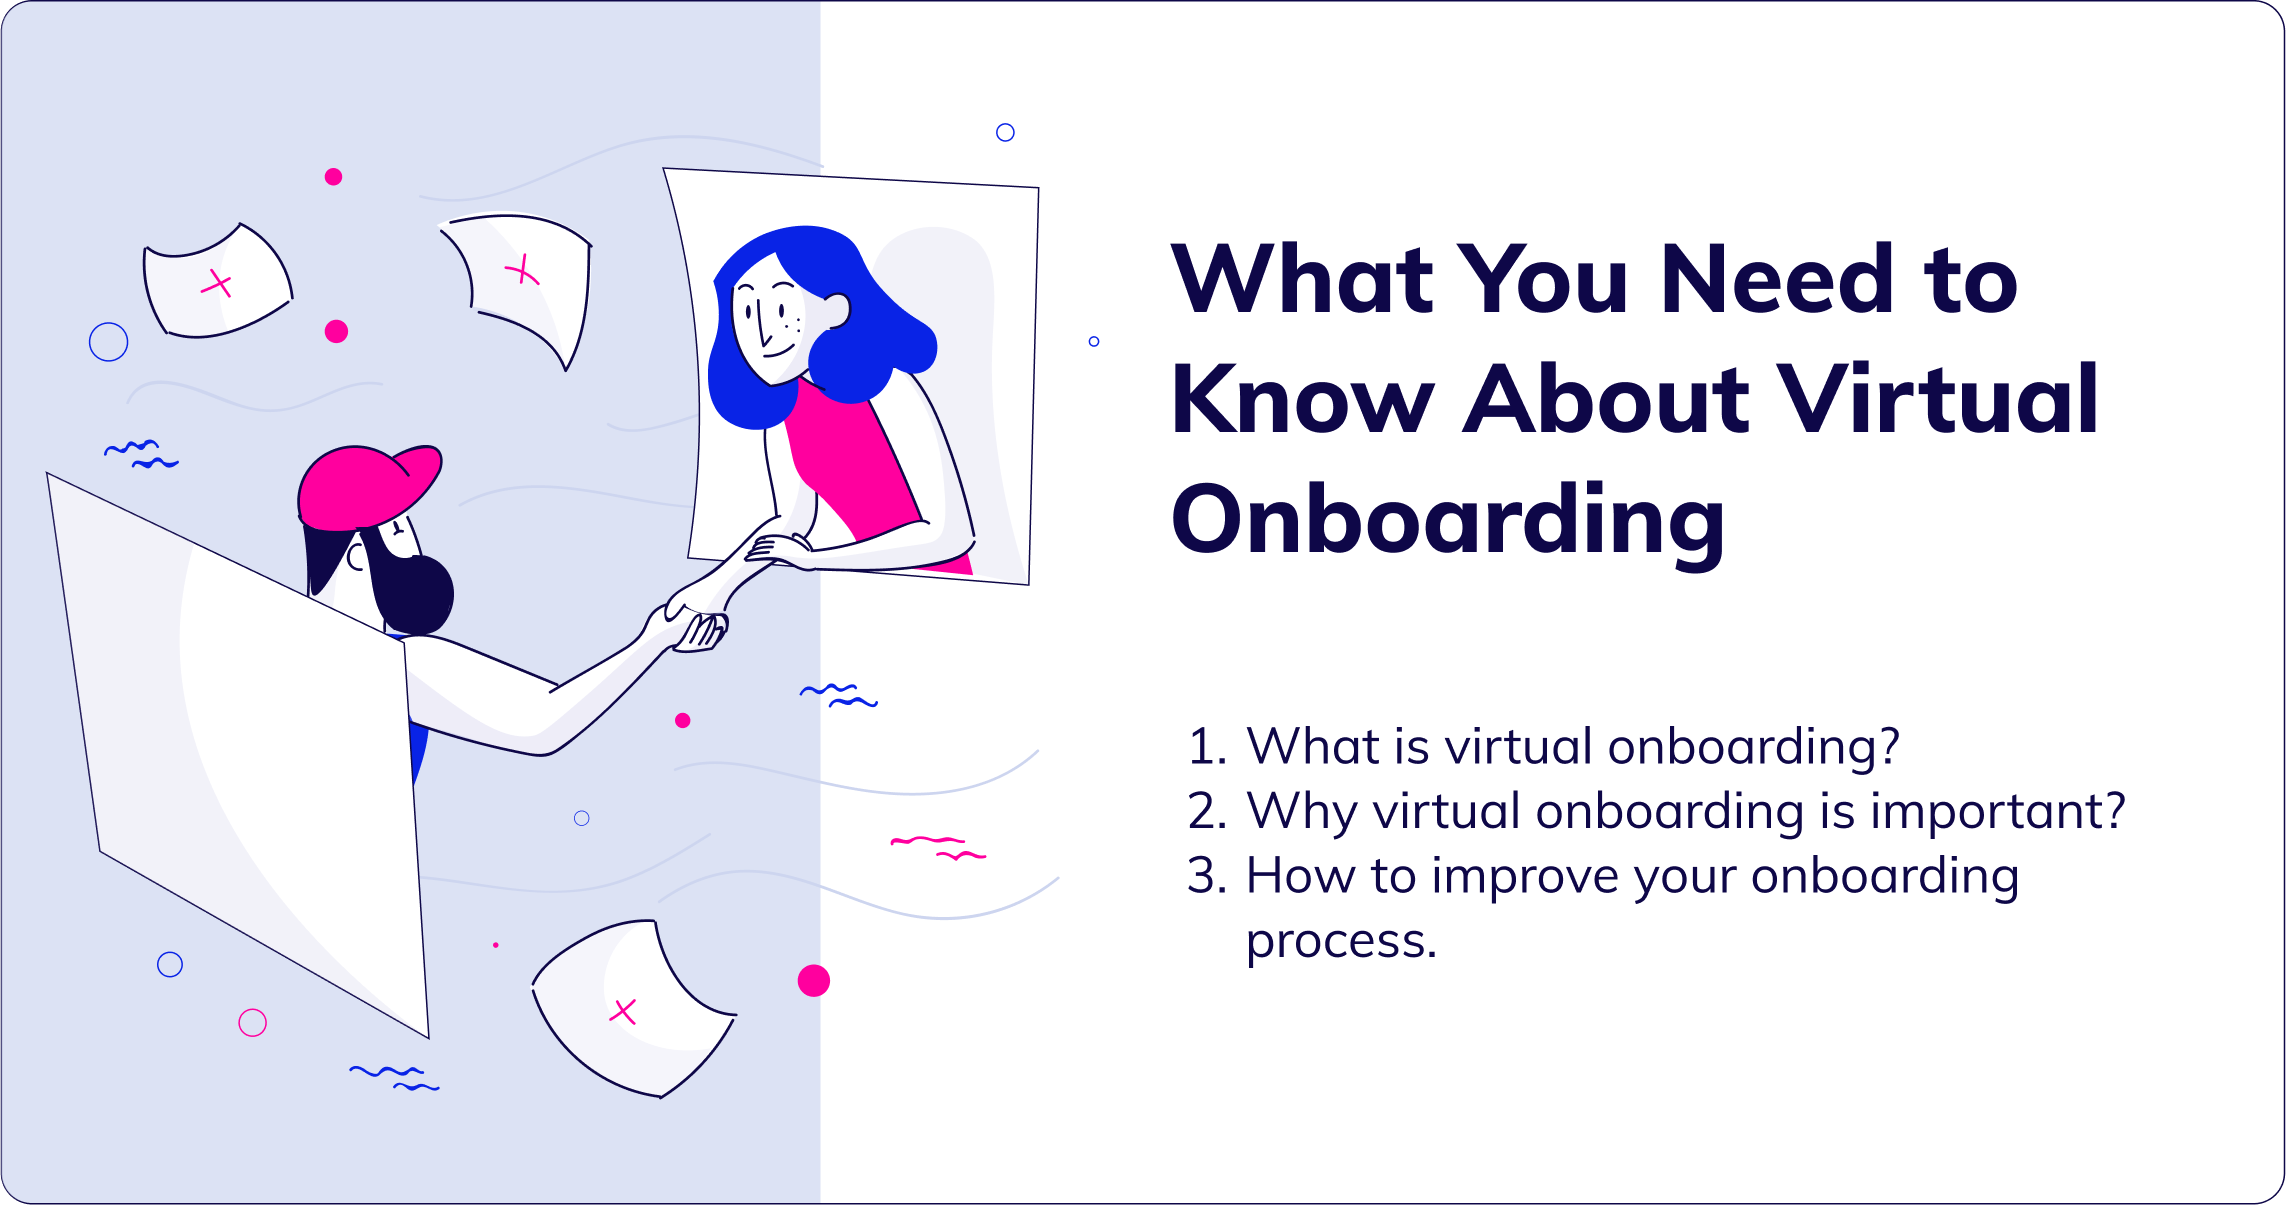 What You Need to Know About Virtual Onboarding